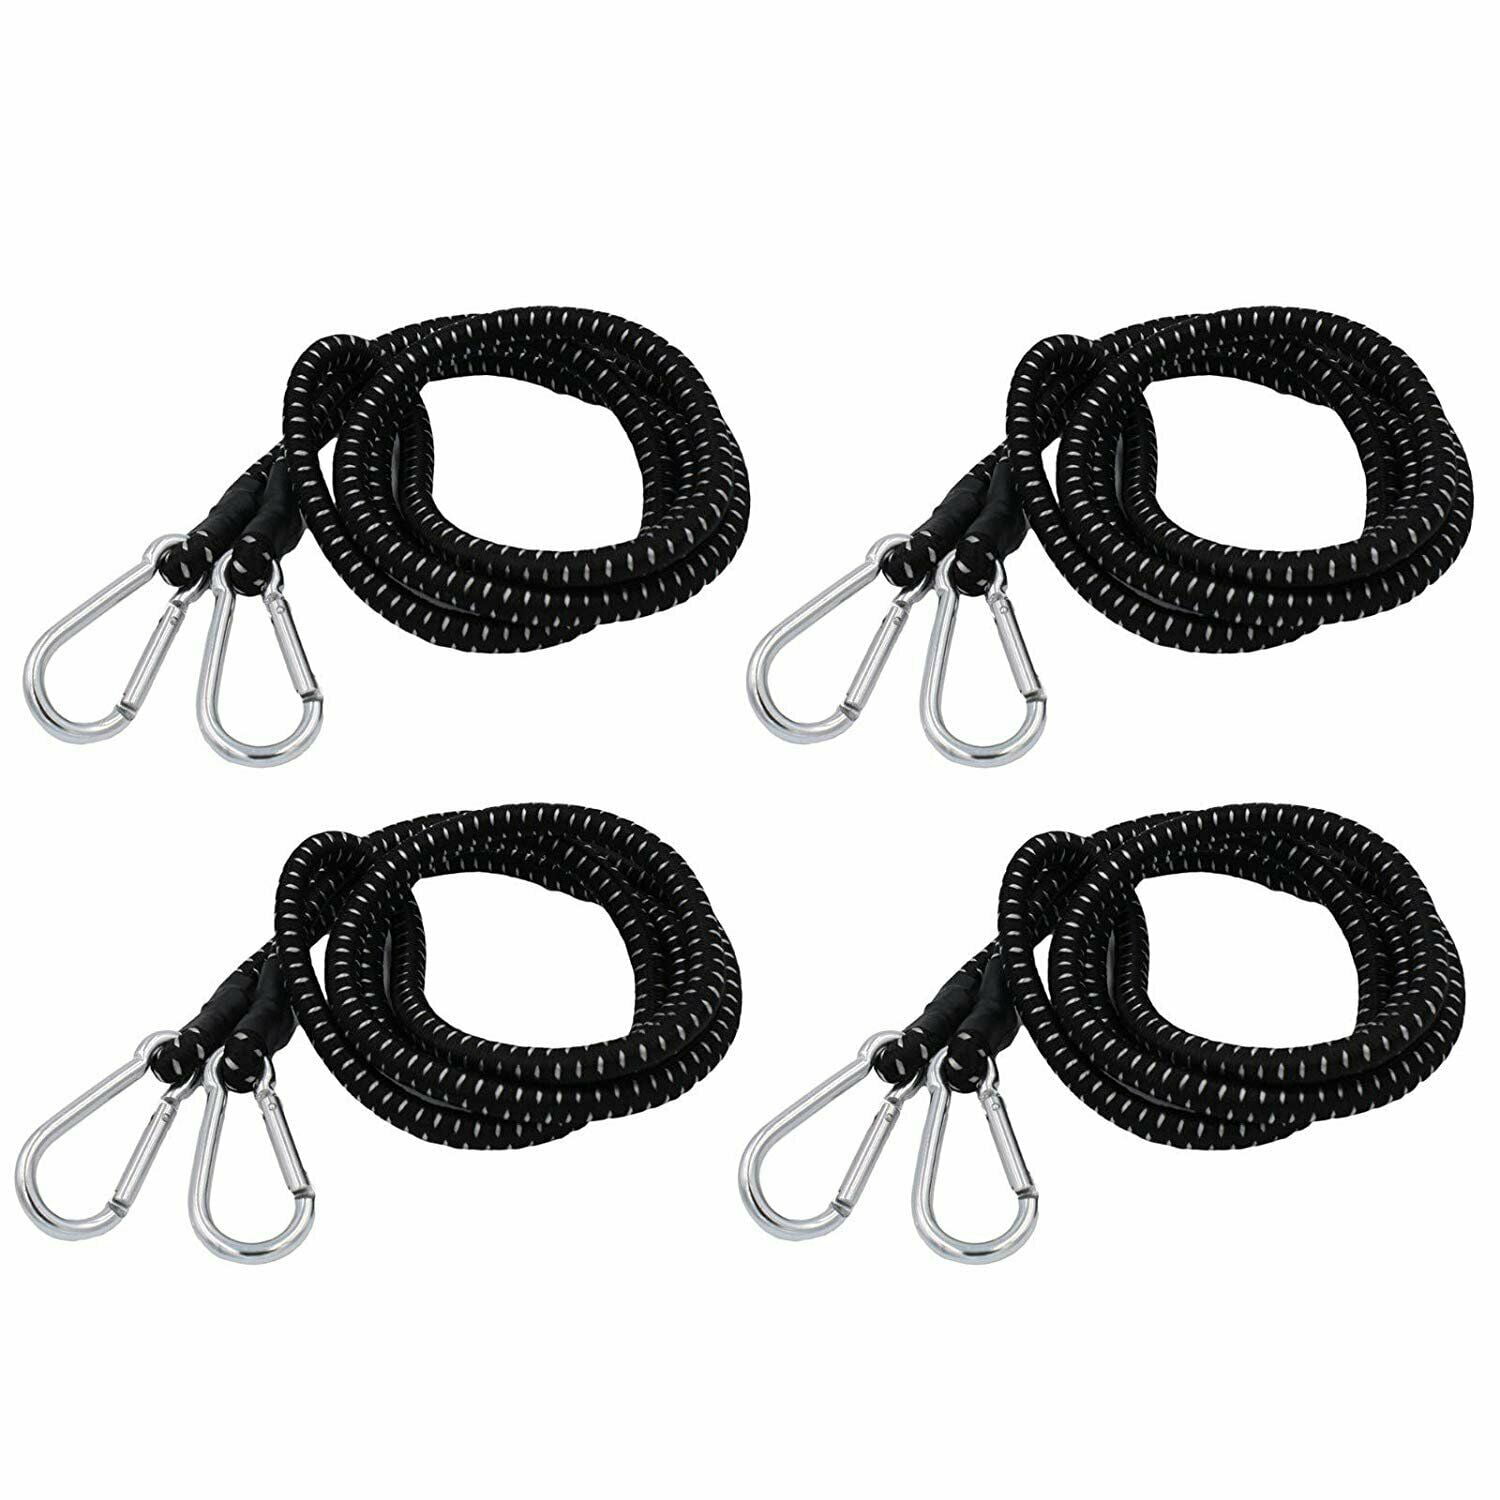 70" inch Extra Long Heavy Duty Bungee Cord Black with Carabiner Hooks Bulk 